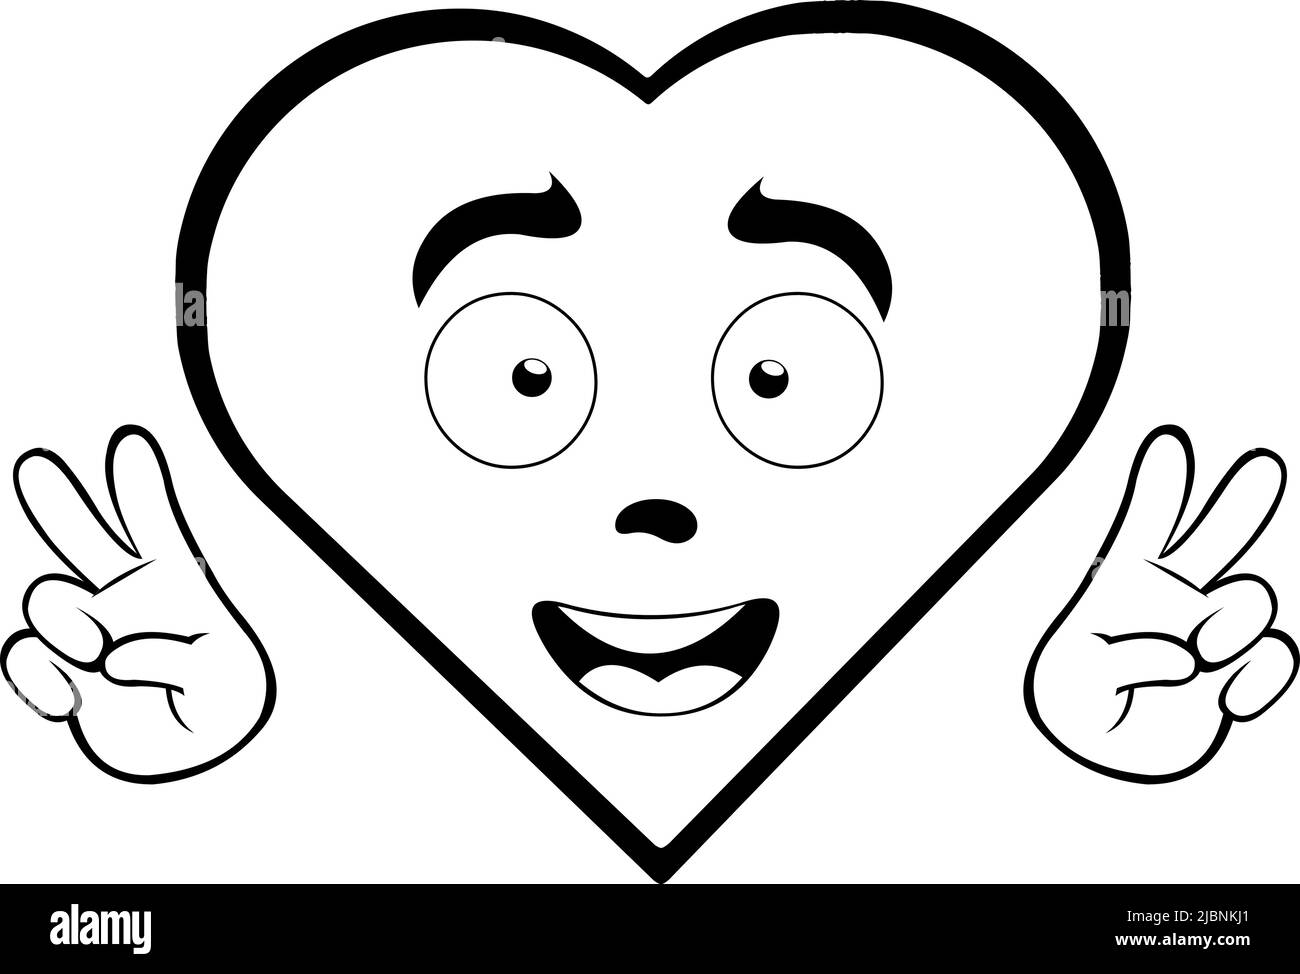 Vector illustration of cartoon heart making the classic gesture of love and peace with the hands, the outlines of the character are drawn in black, th Stock Vector